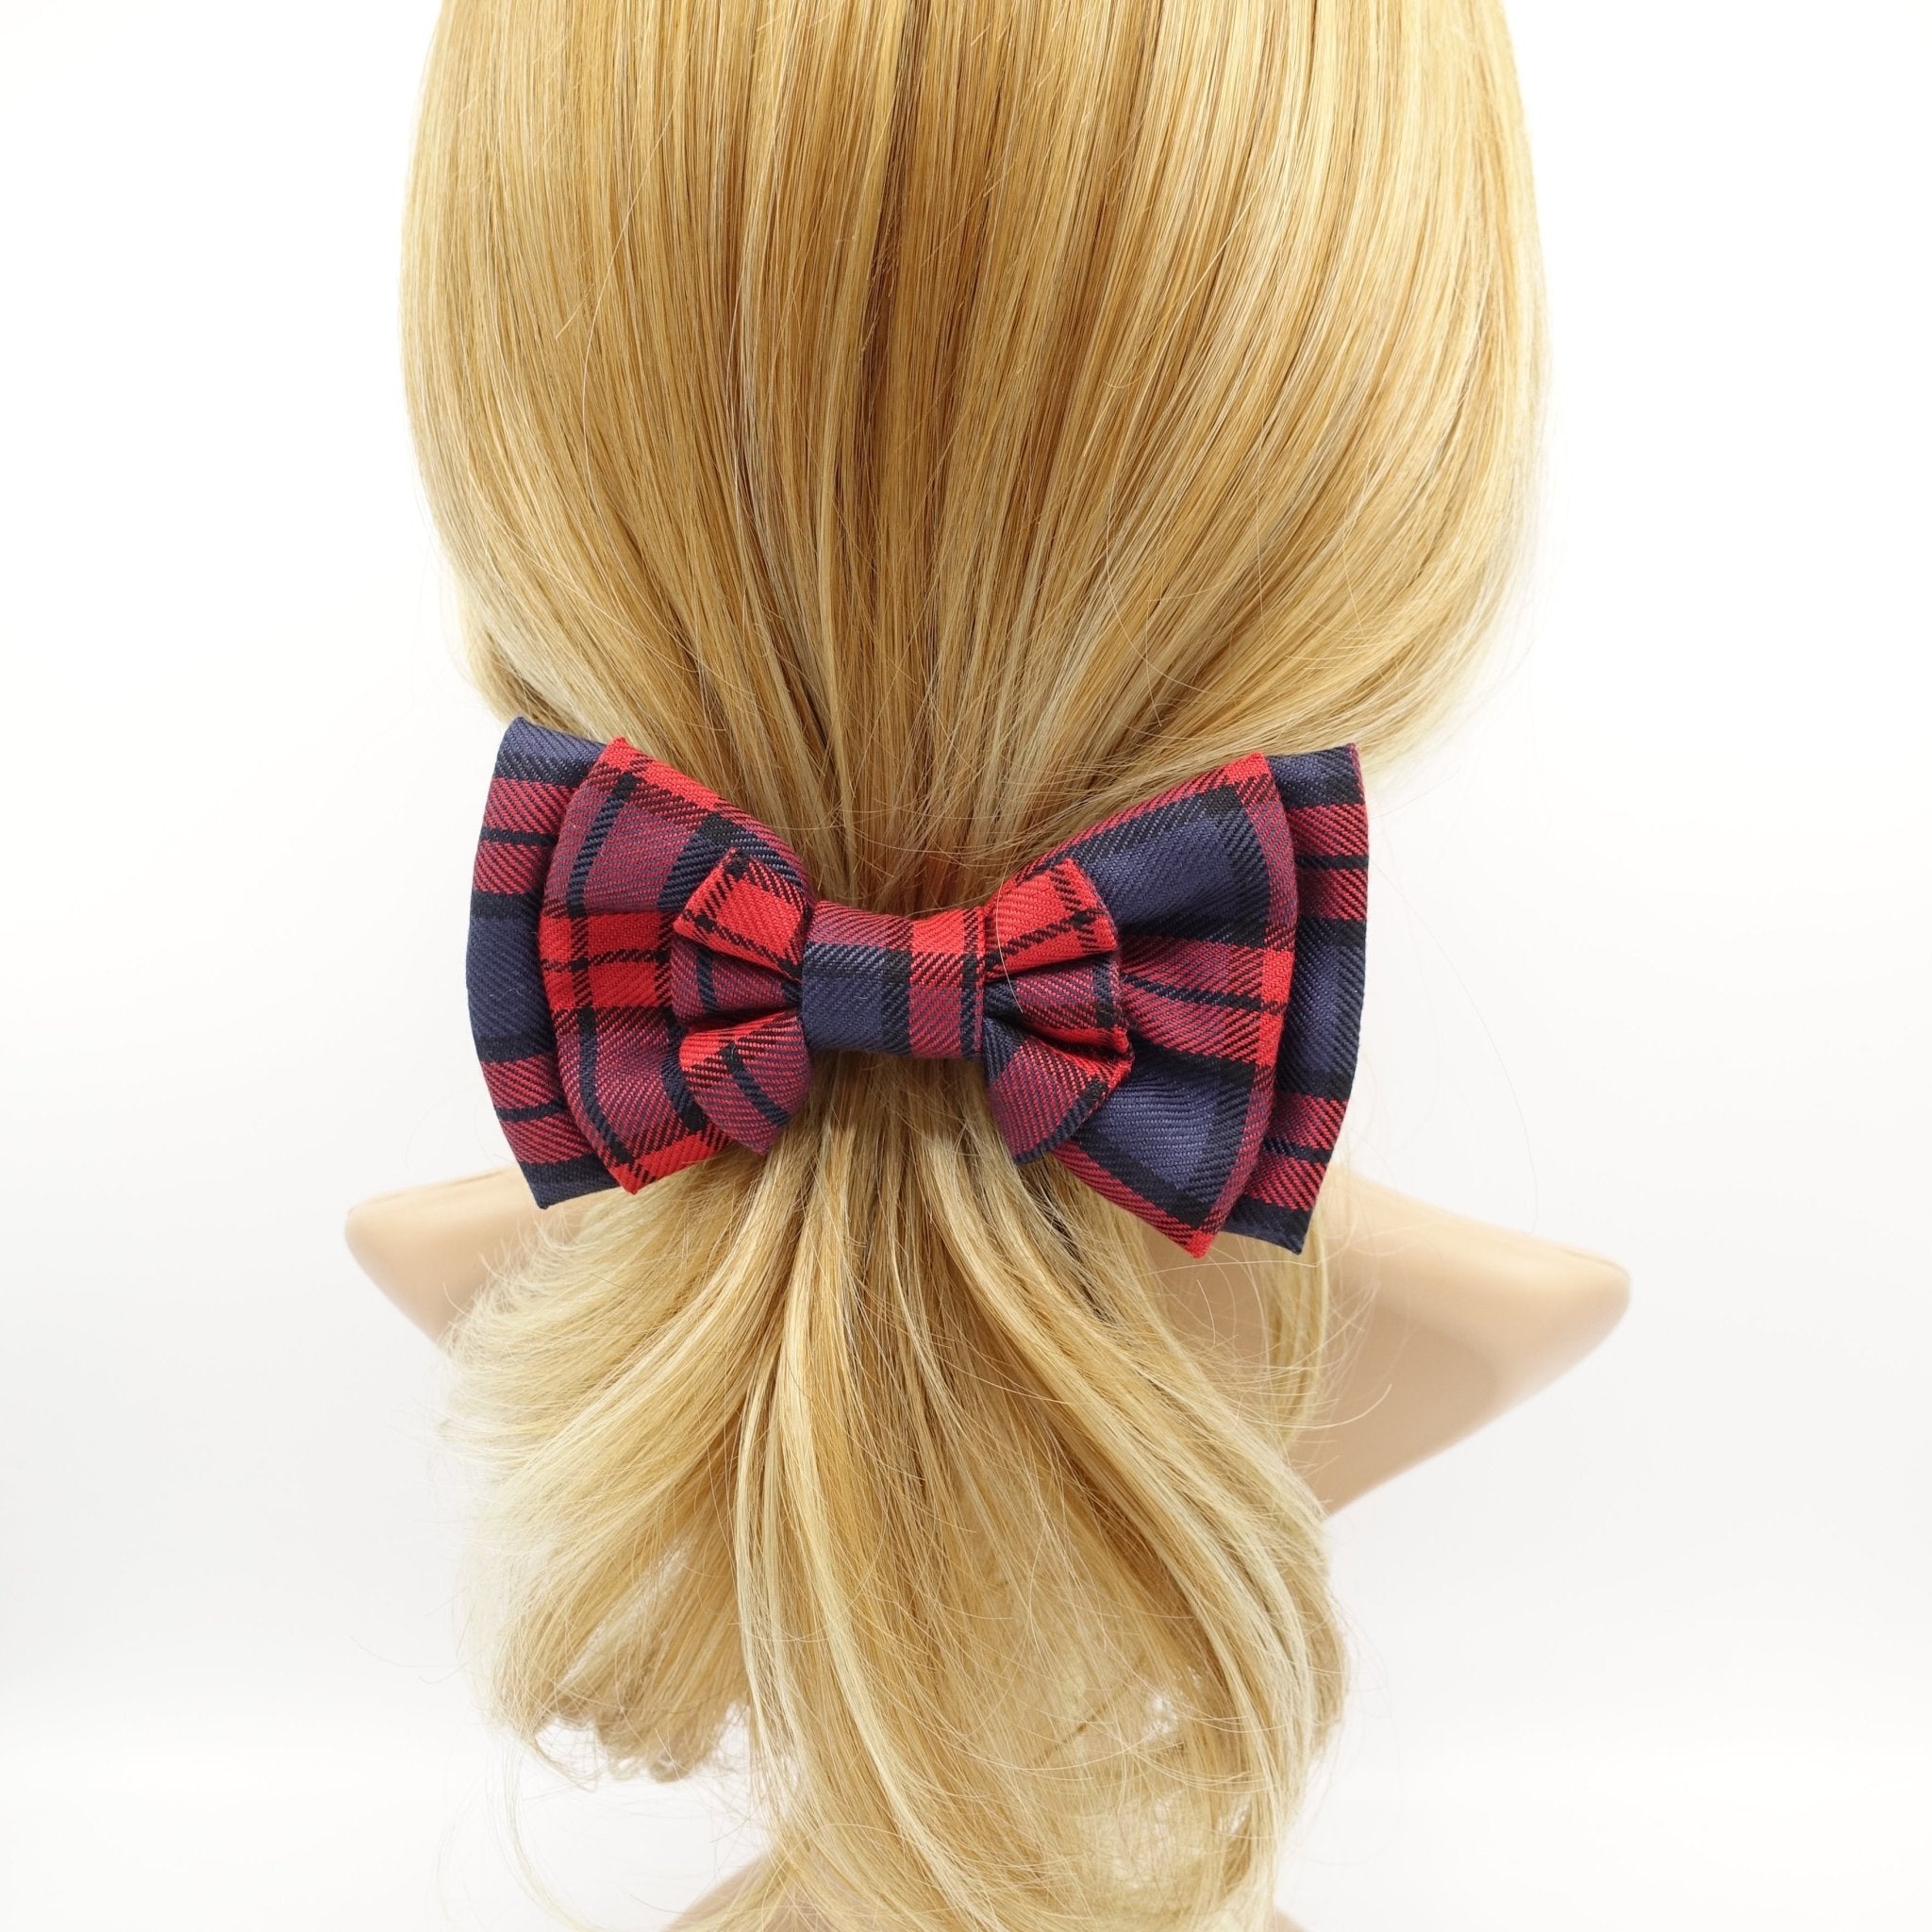 veryshine.com claw/banana/barrette Red wine plaid check hair bow multi layered style bow french hair barrette